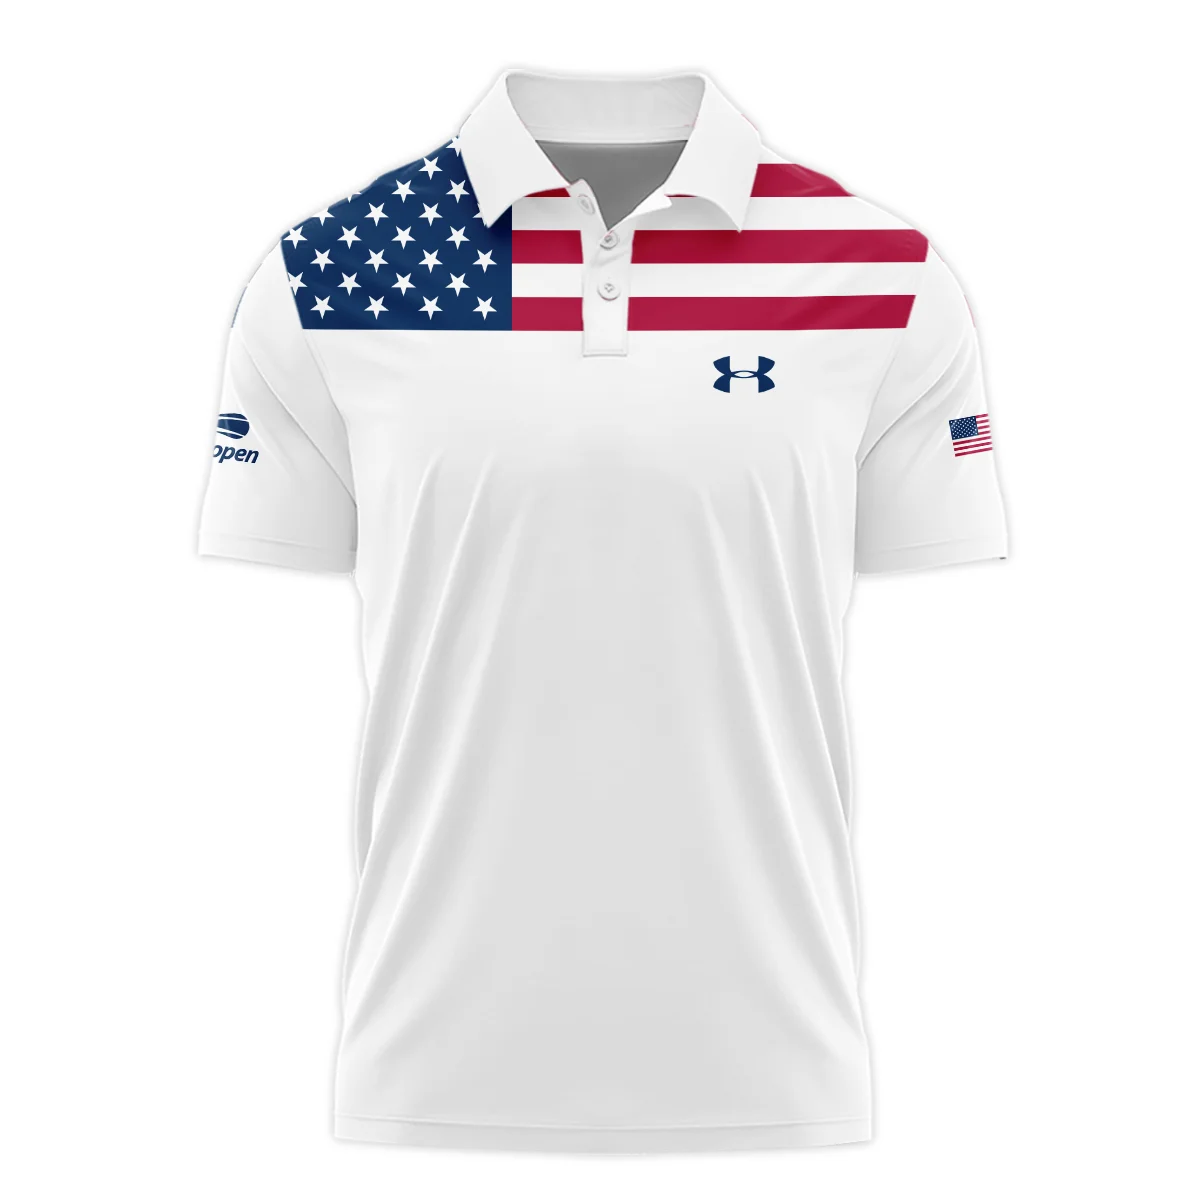 US Open Tennis Champions Under Armour USA Flag White Polo Shirt Style Classic Polo Shirt For Men